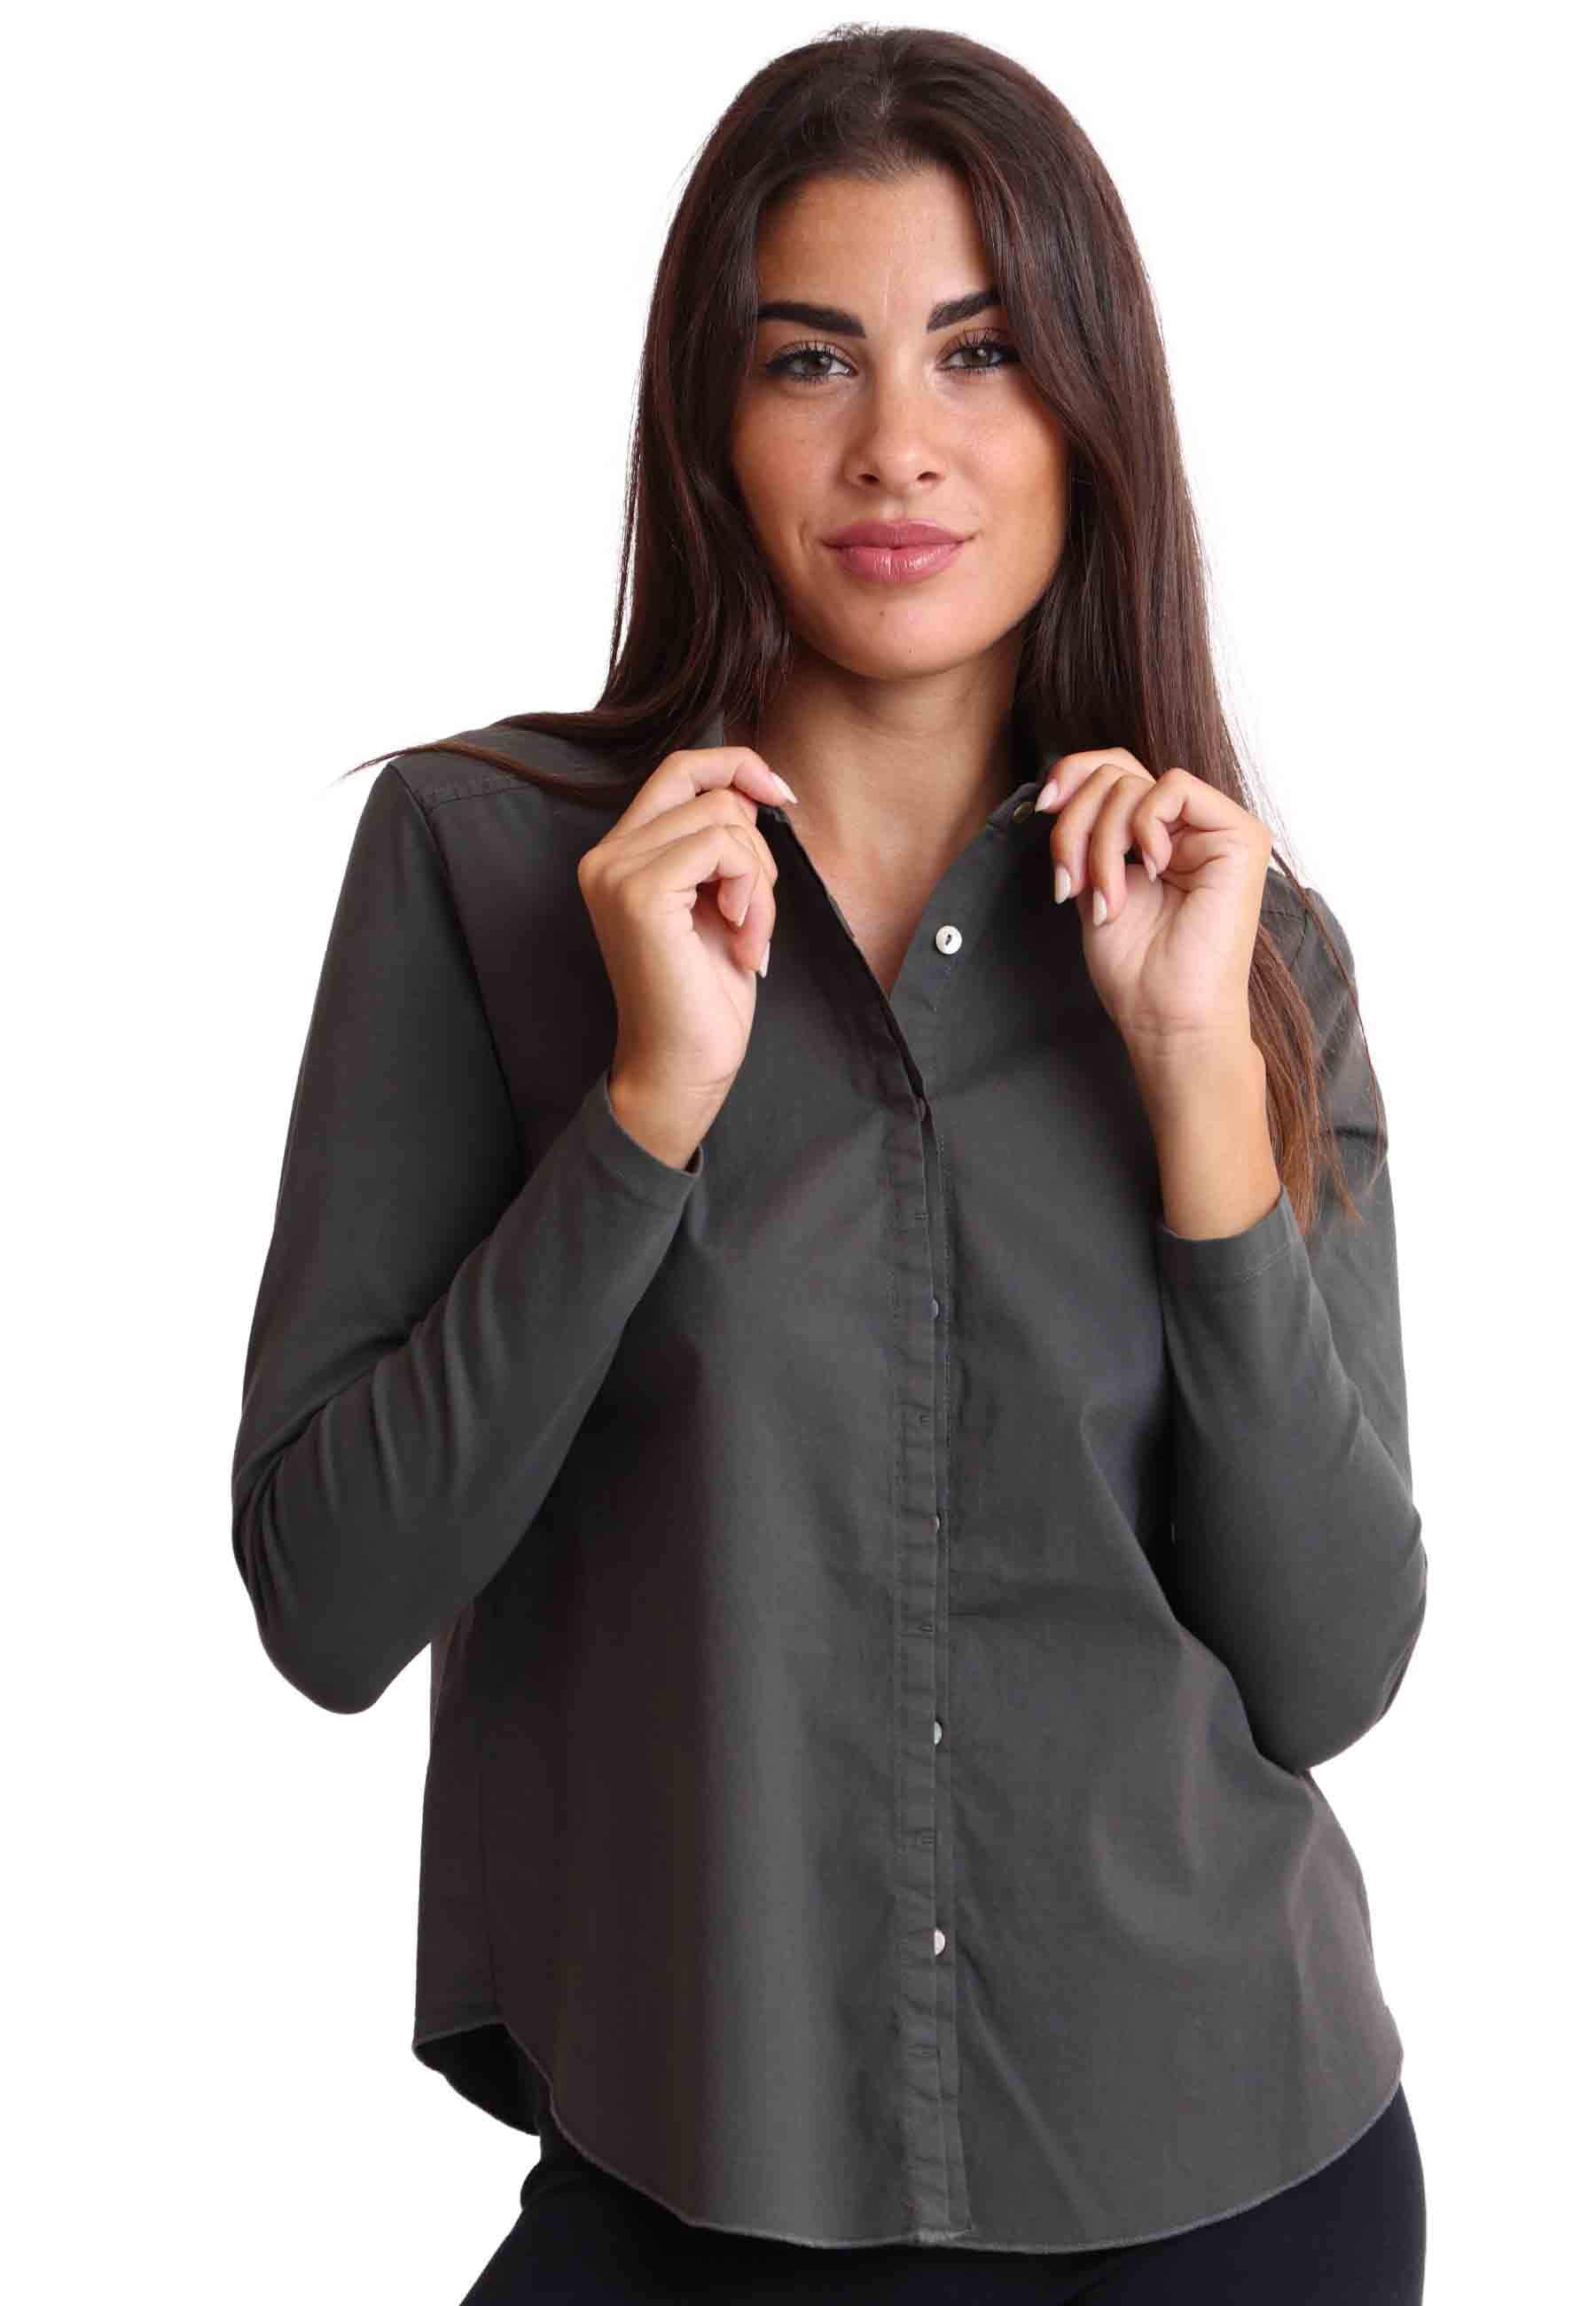 Women's gray cotton shirt with long sleeves without cuffs